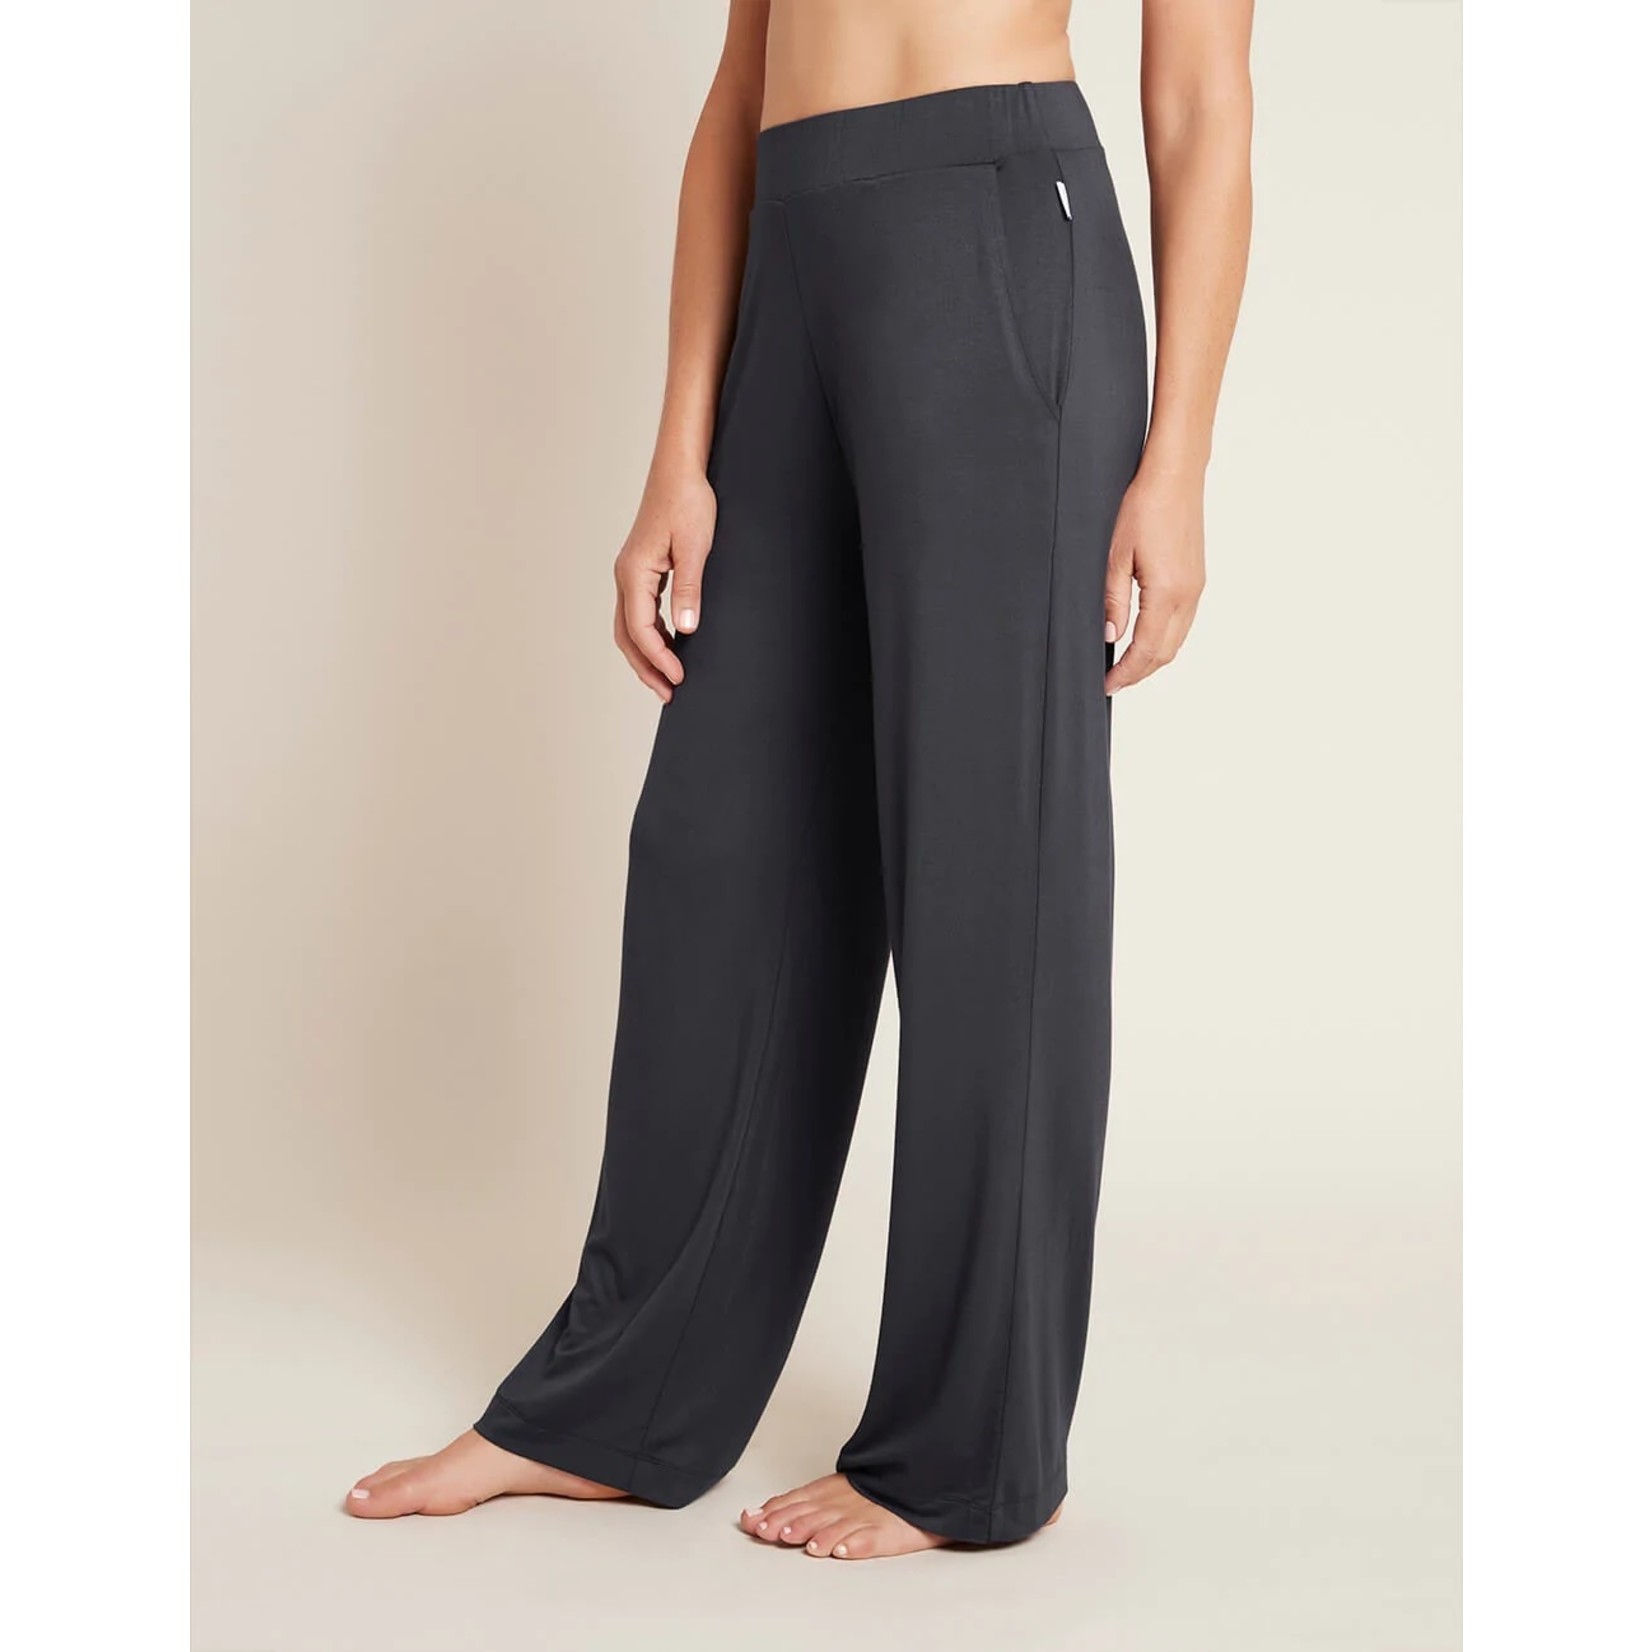 BOODY BOODY DOWNTIME WIDE LEG LOUNGE PANT